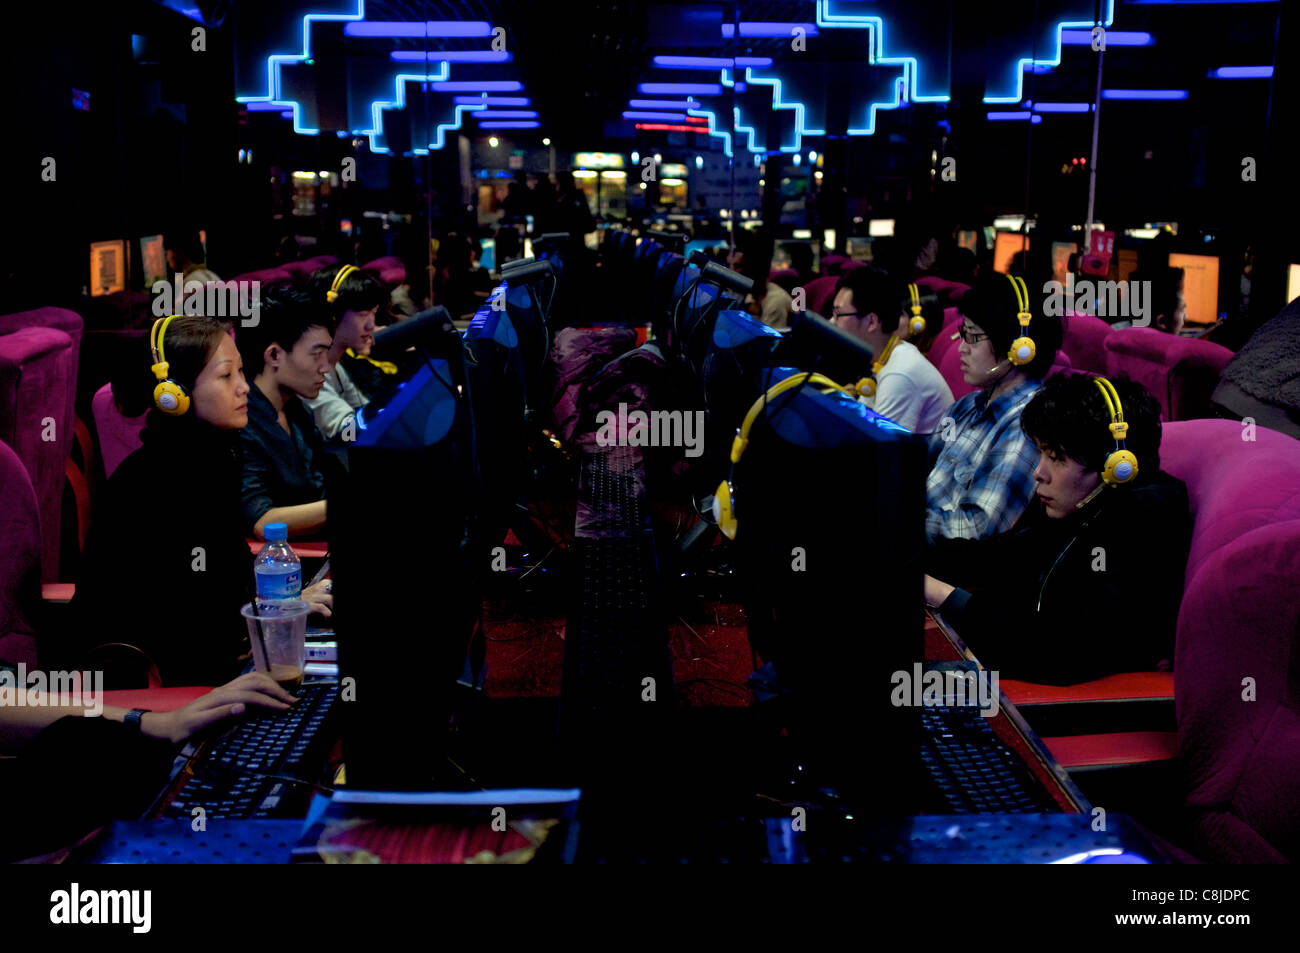 An internet cafe in Beijing, China. 24-Oct-2011 Stock Photo